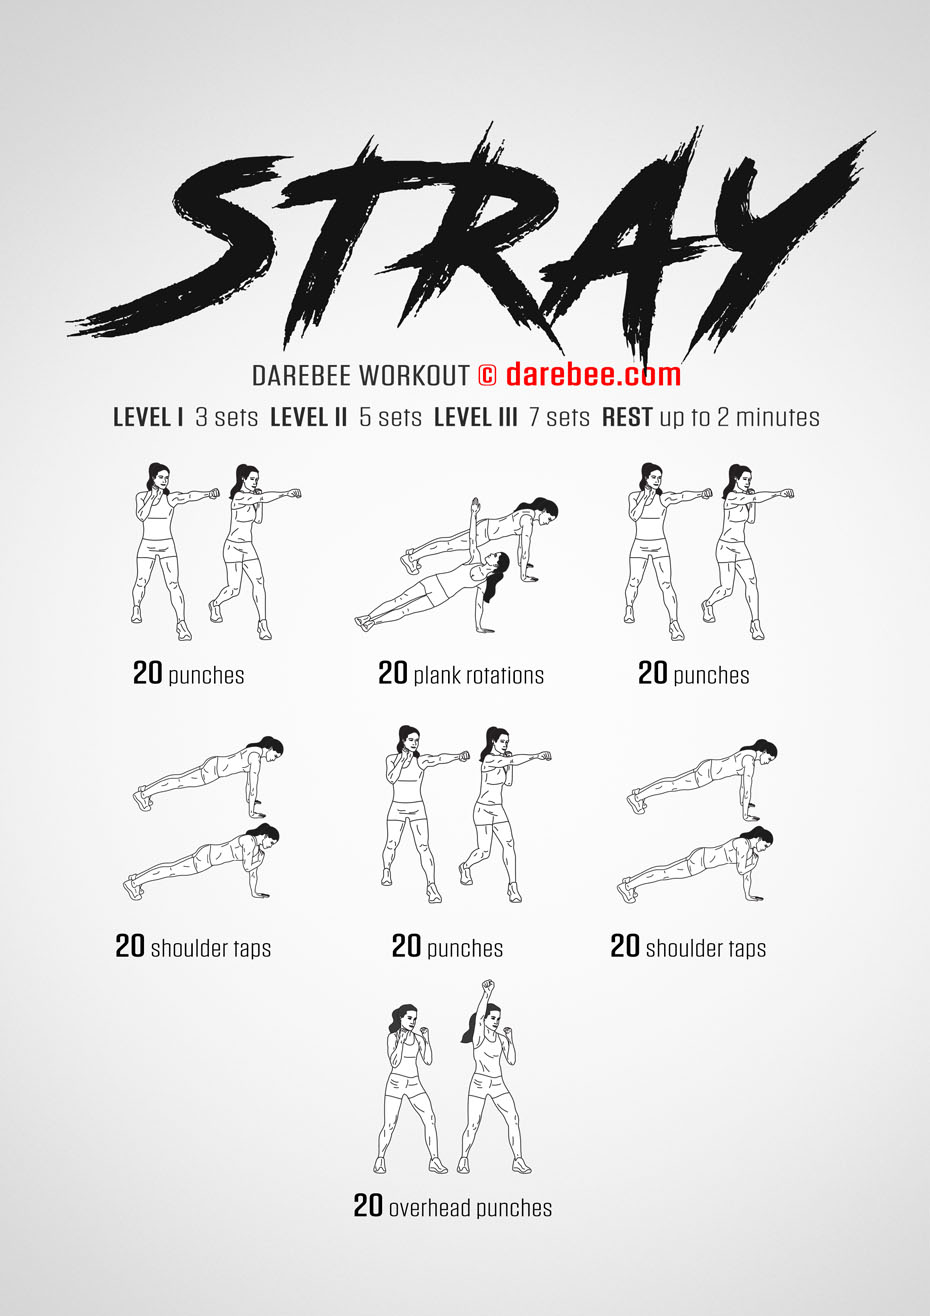 Stray is a DAREBEE home fitness, no equipment workout that works the entire body and will leave you feeling better as well as fitter.